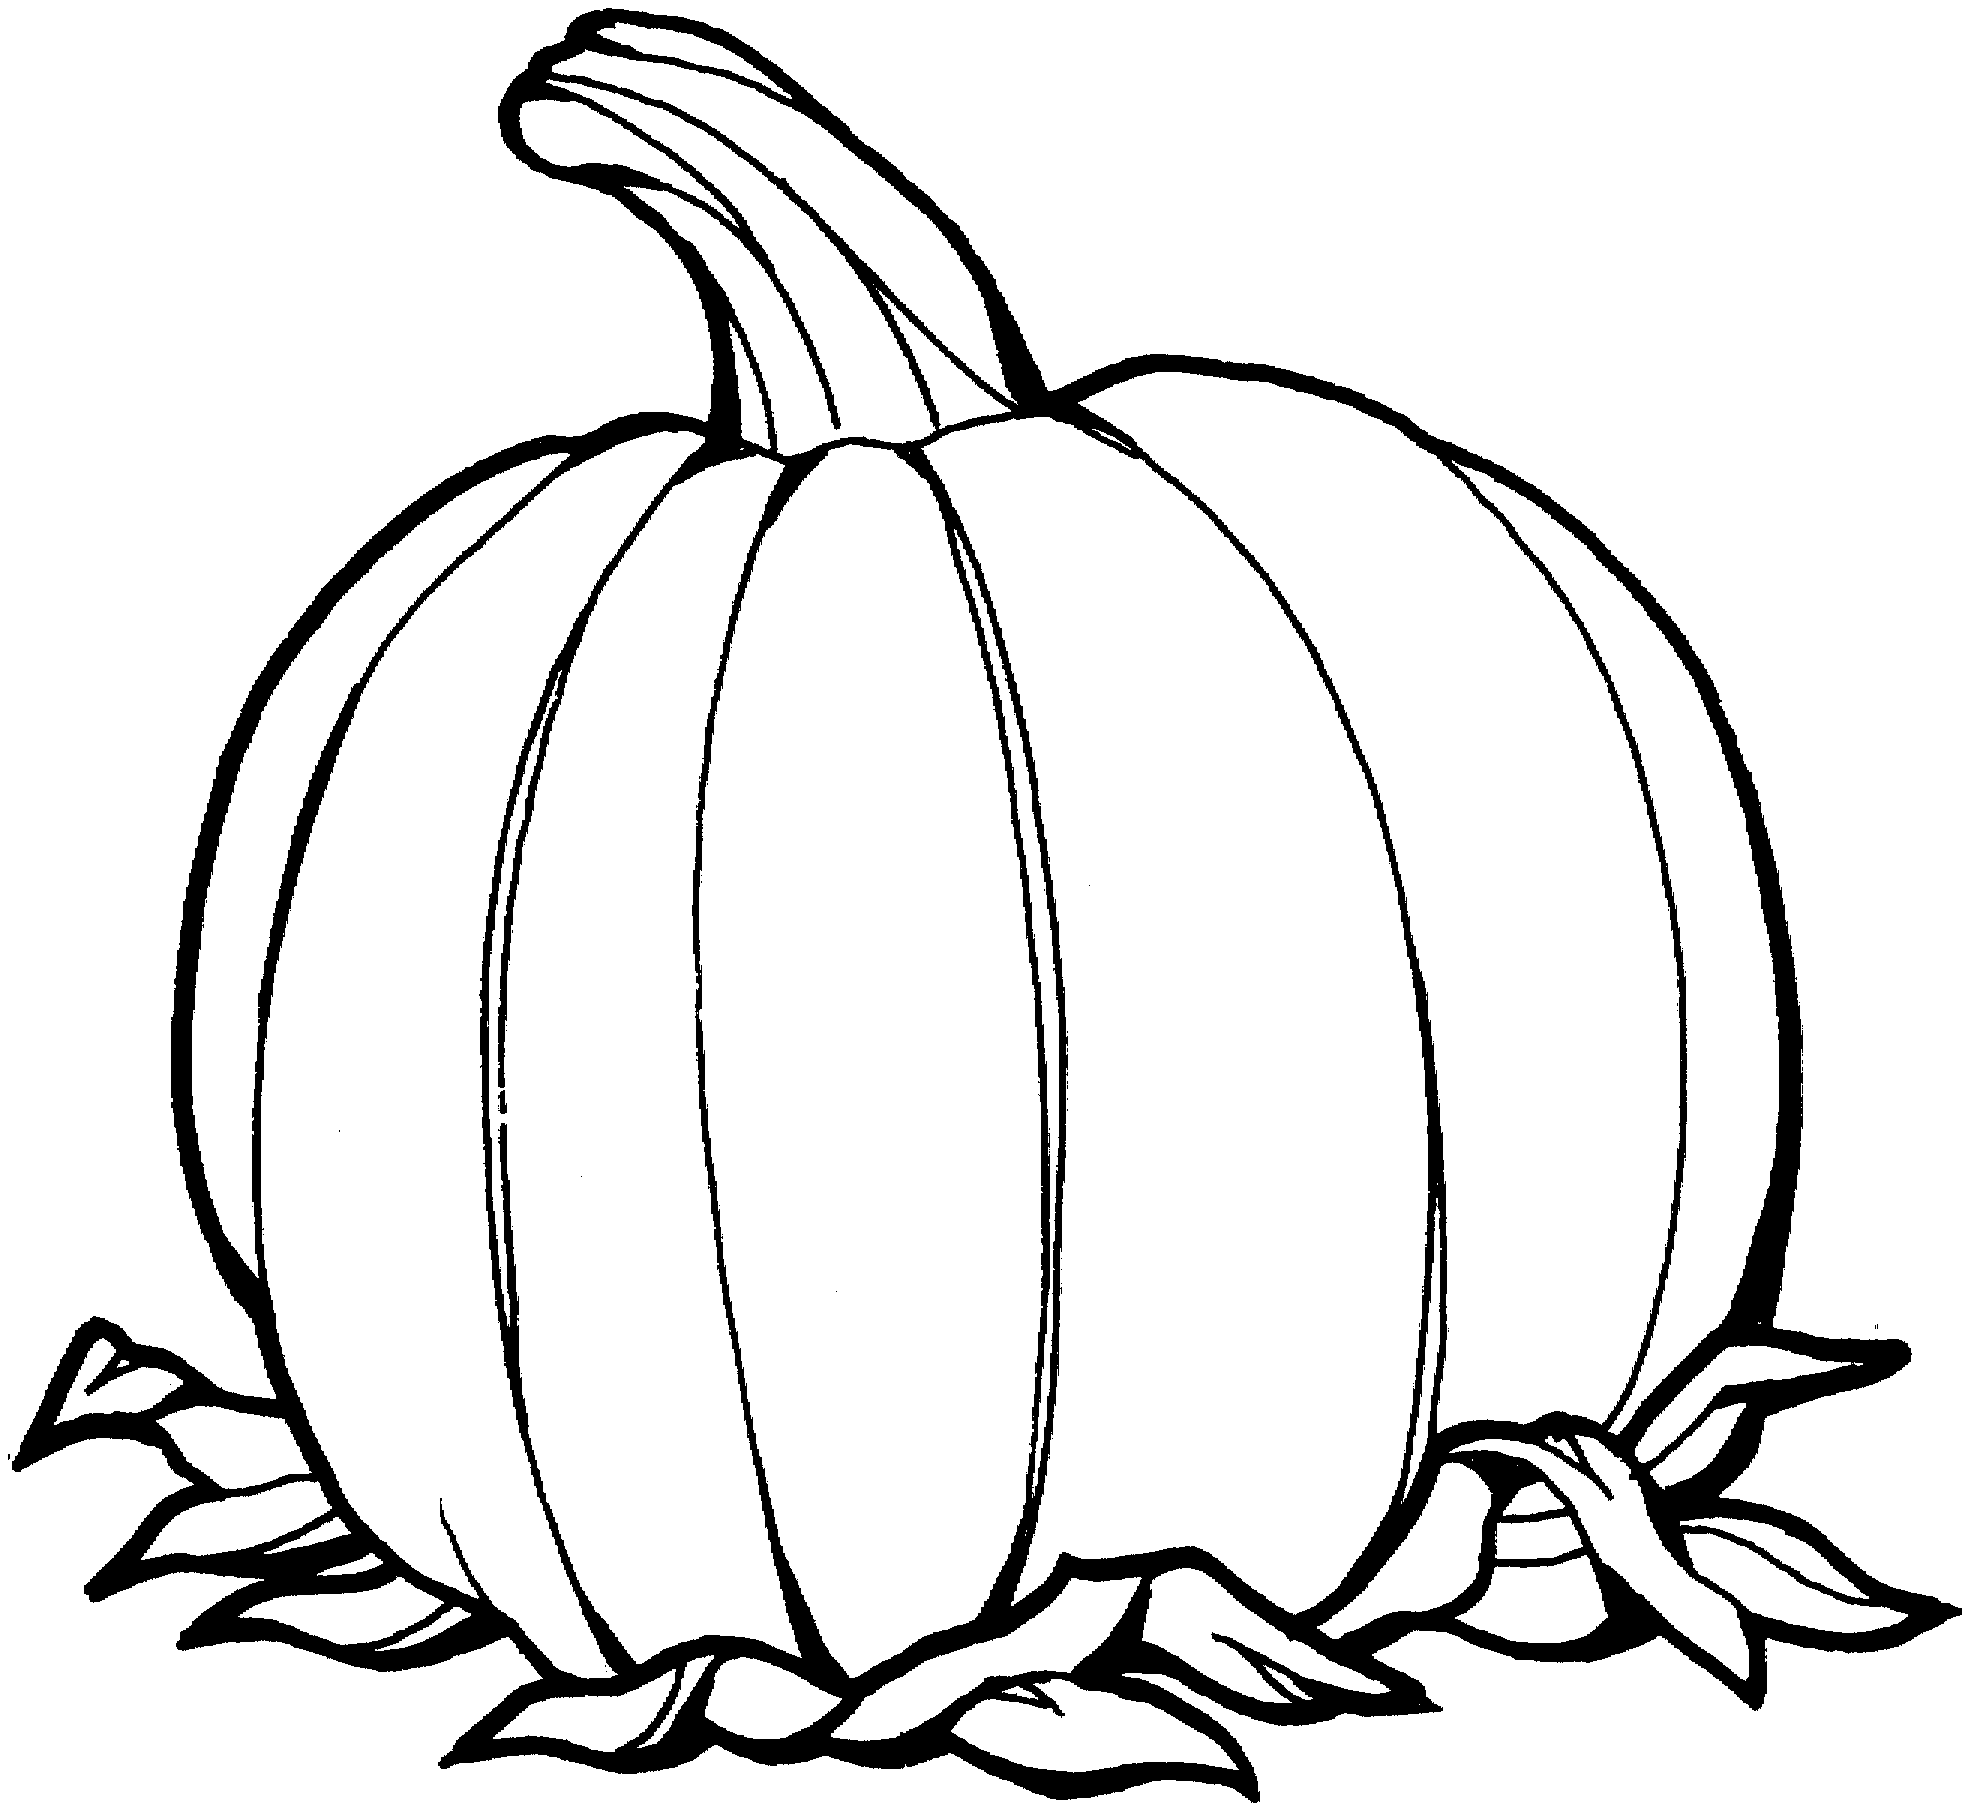 October Word Clipart Black And White. Snowjet.co